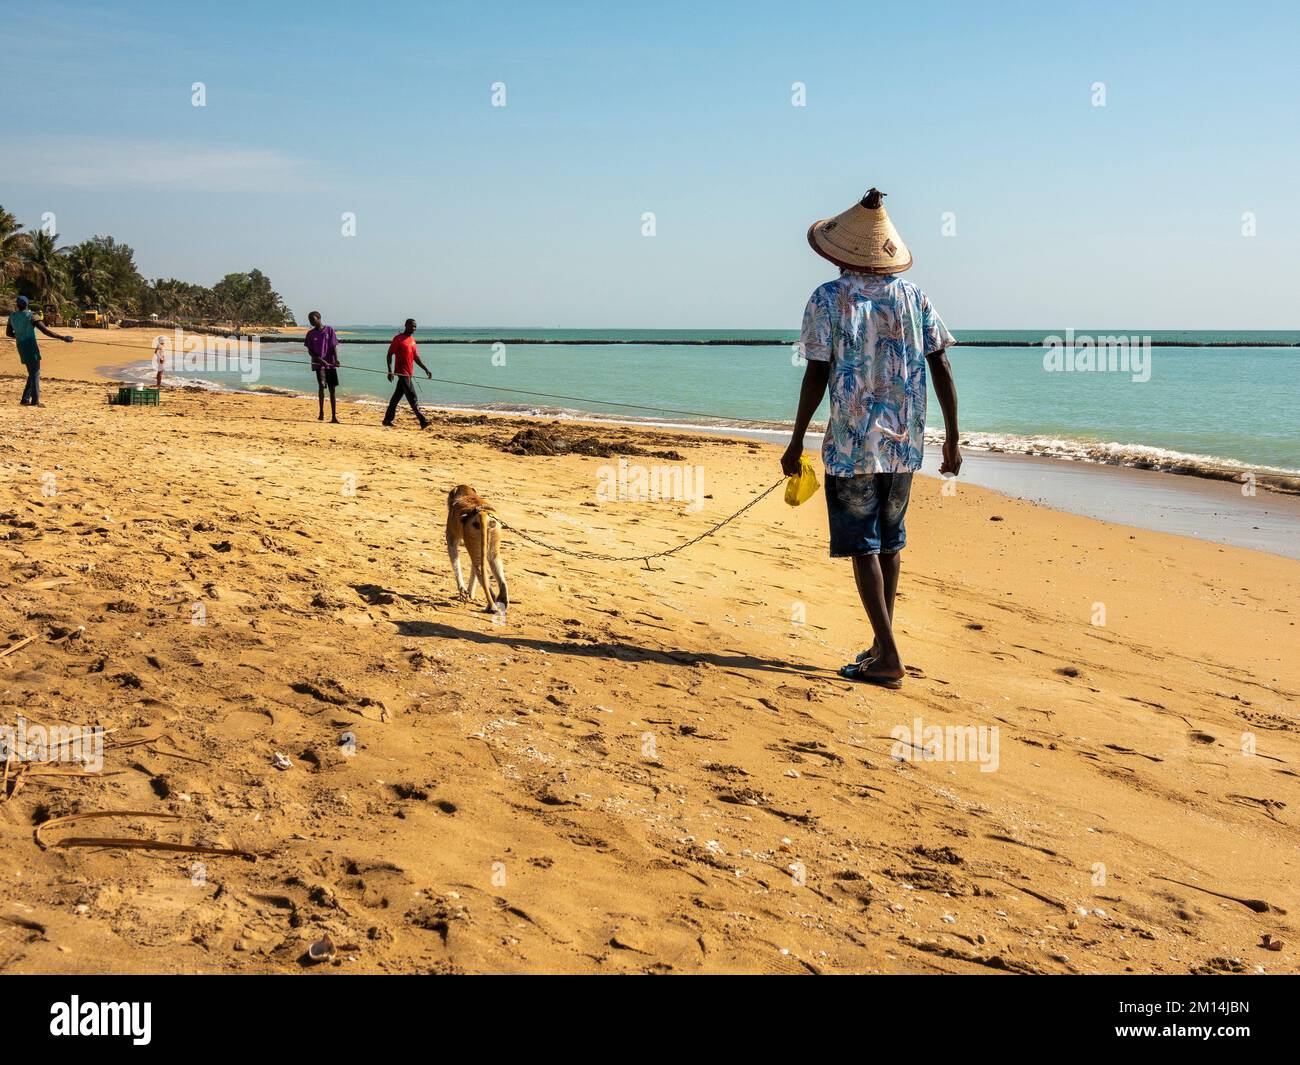 MBOUR, SENEGAL - JANUARY CIRCA, 2022. Scene of unidentified man with hat on beach keeping his monkey on a leash as domestic animal. Monkeys, wild or d Stock Photo